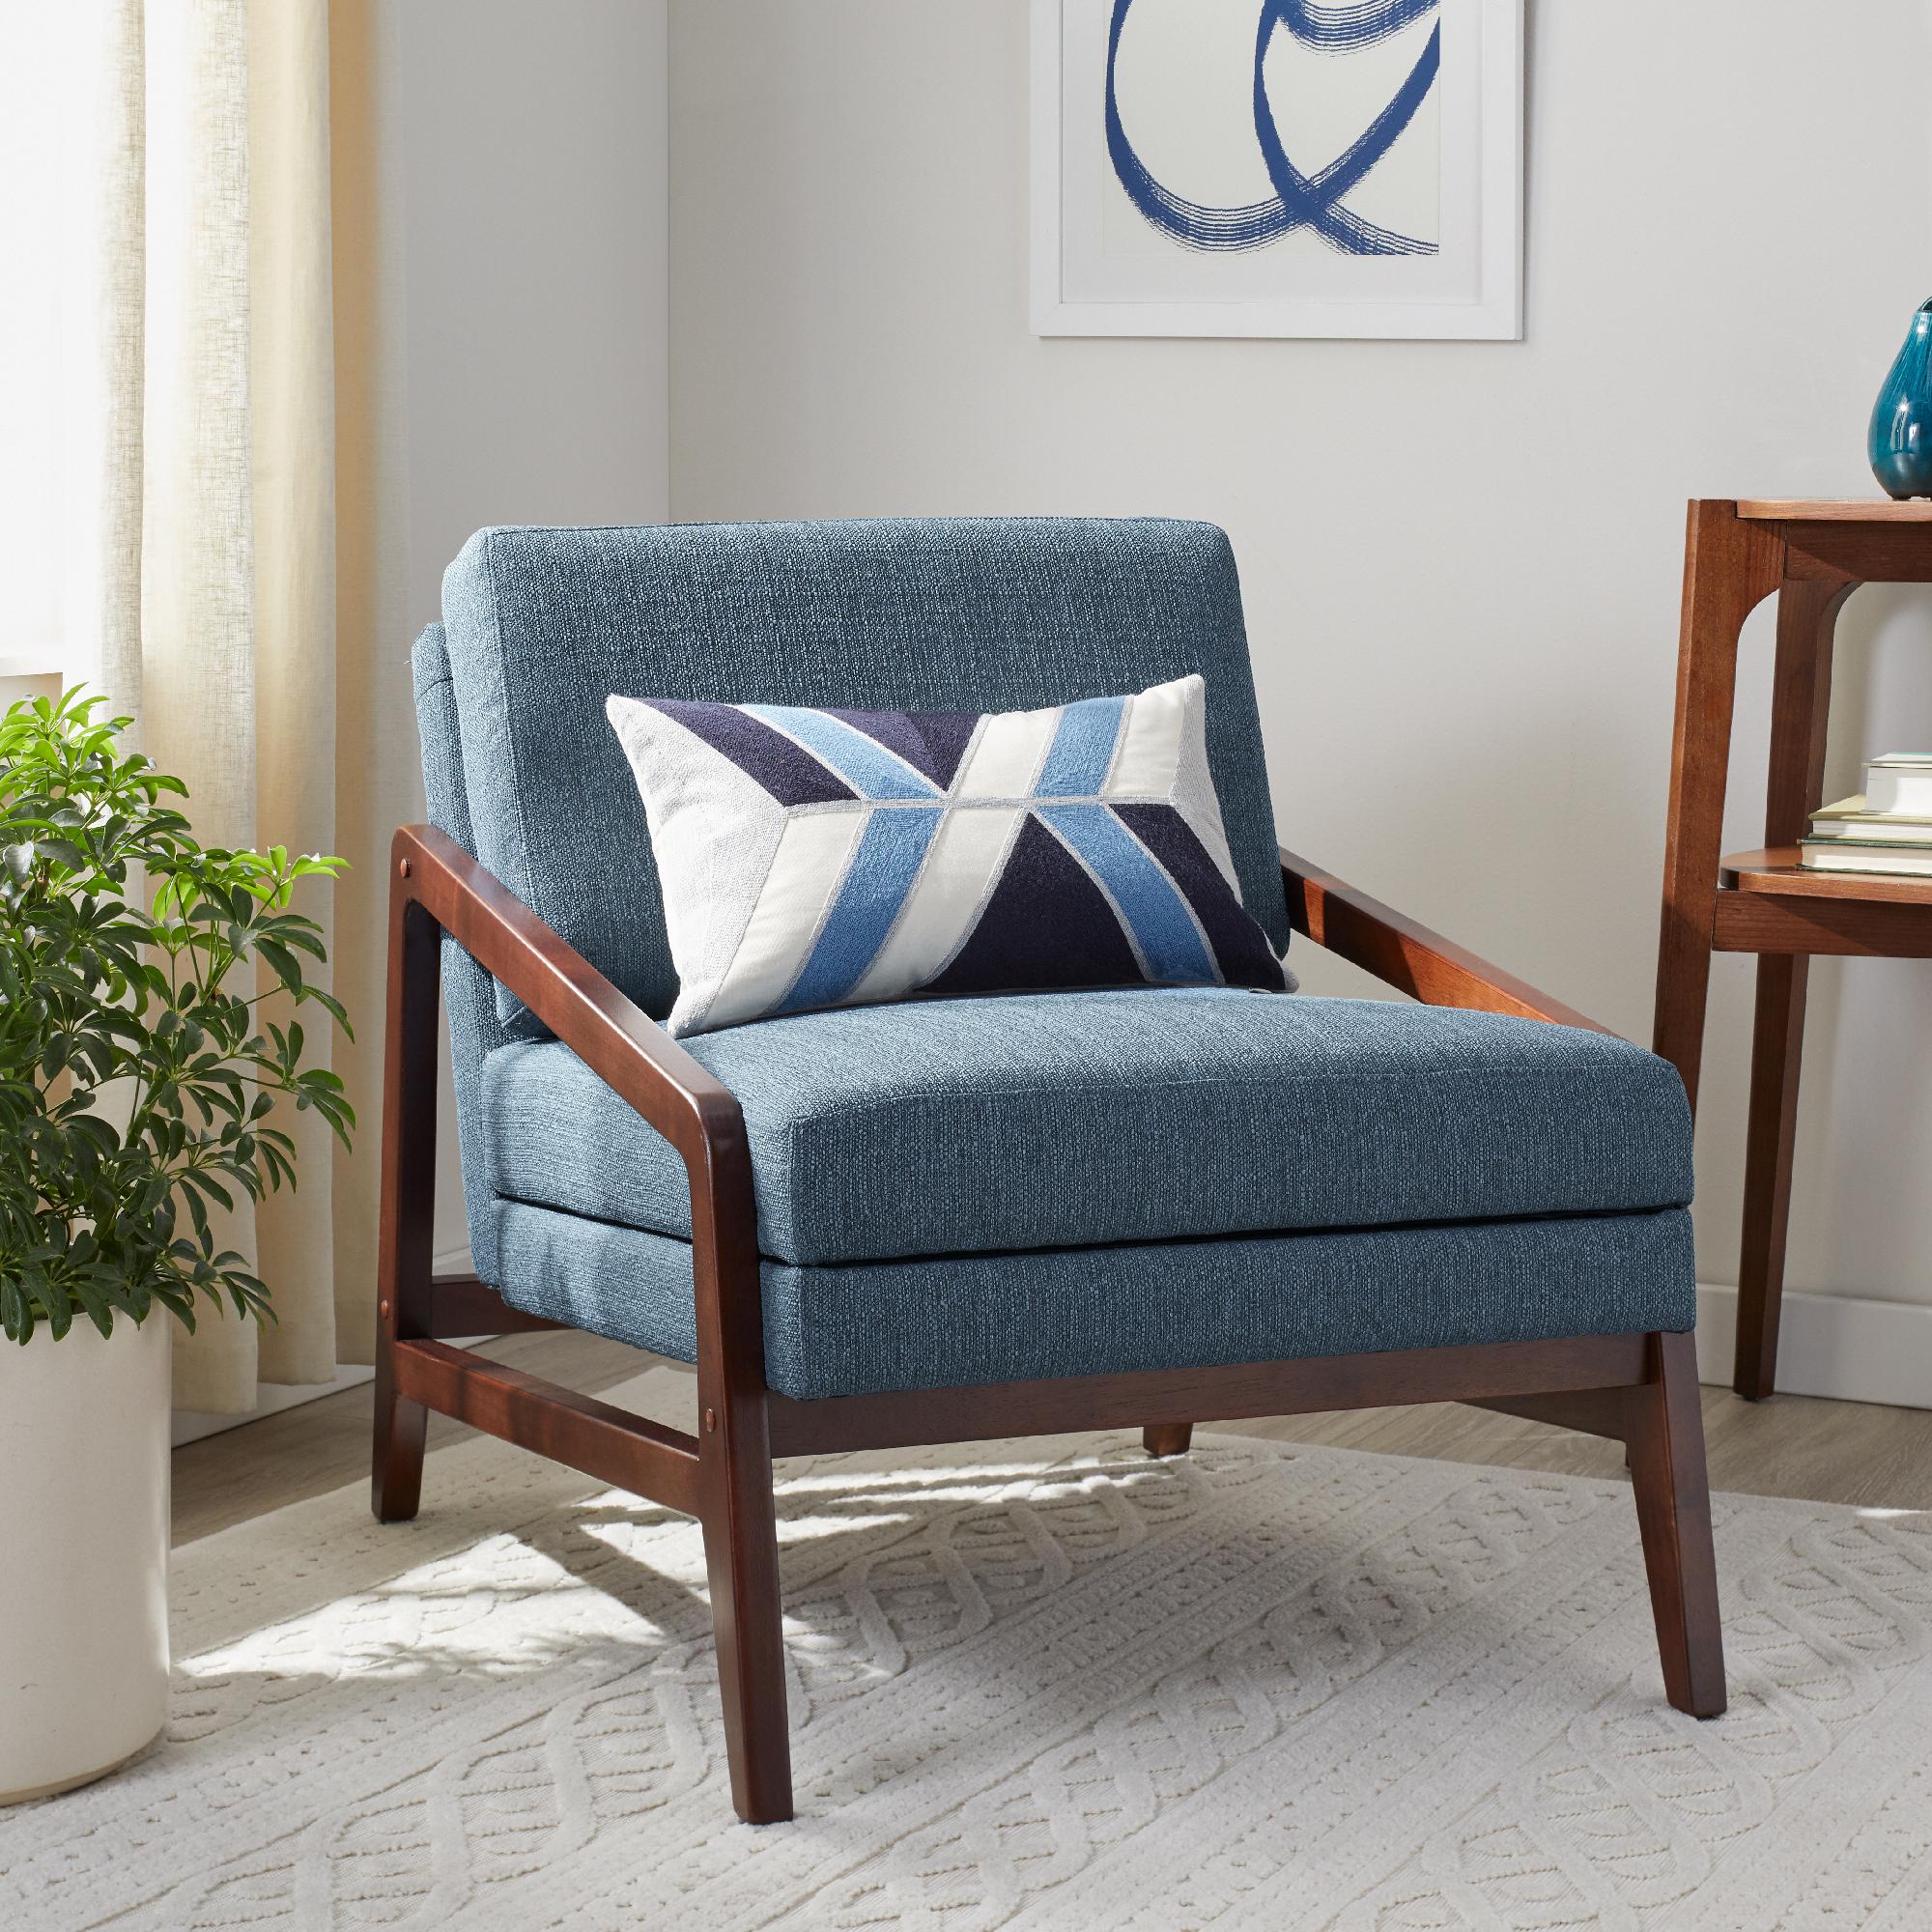 save an extra 15% on Select Living Room Furniture*